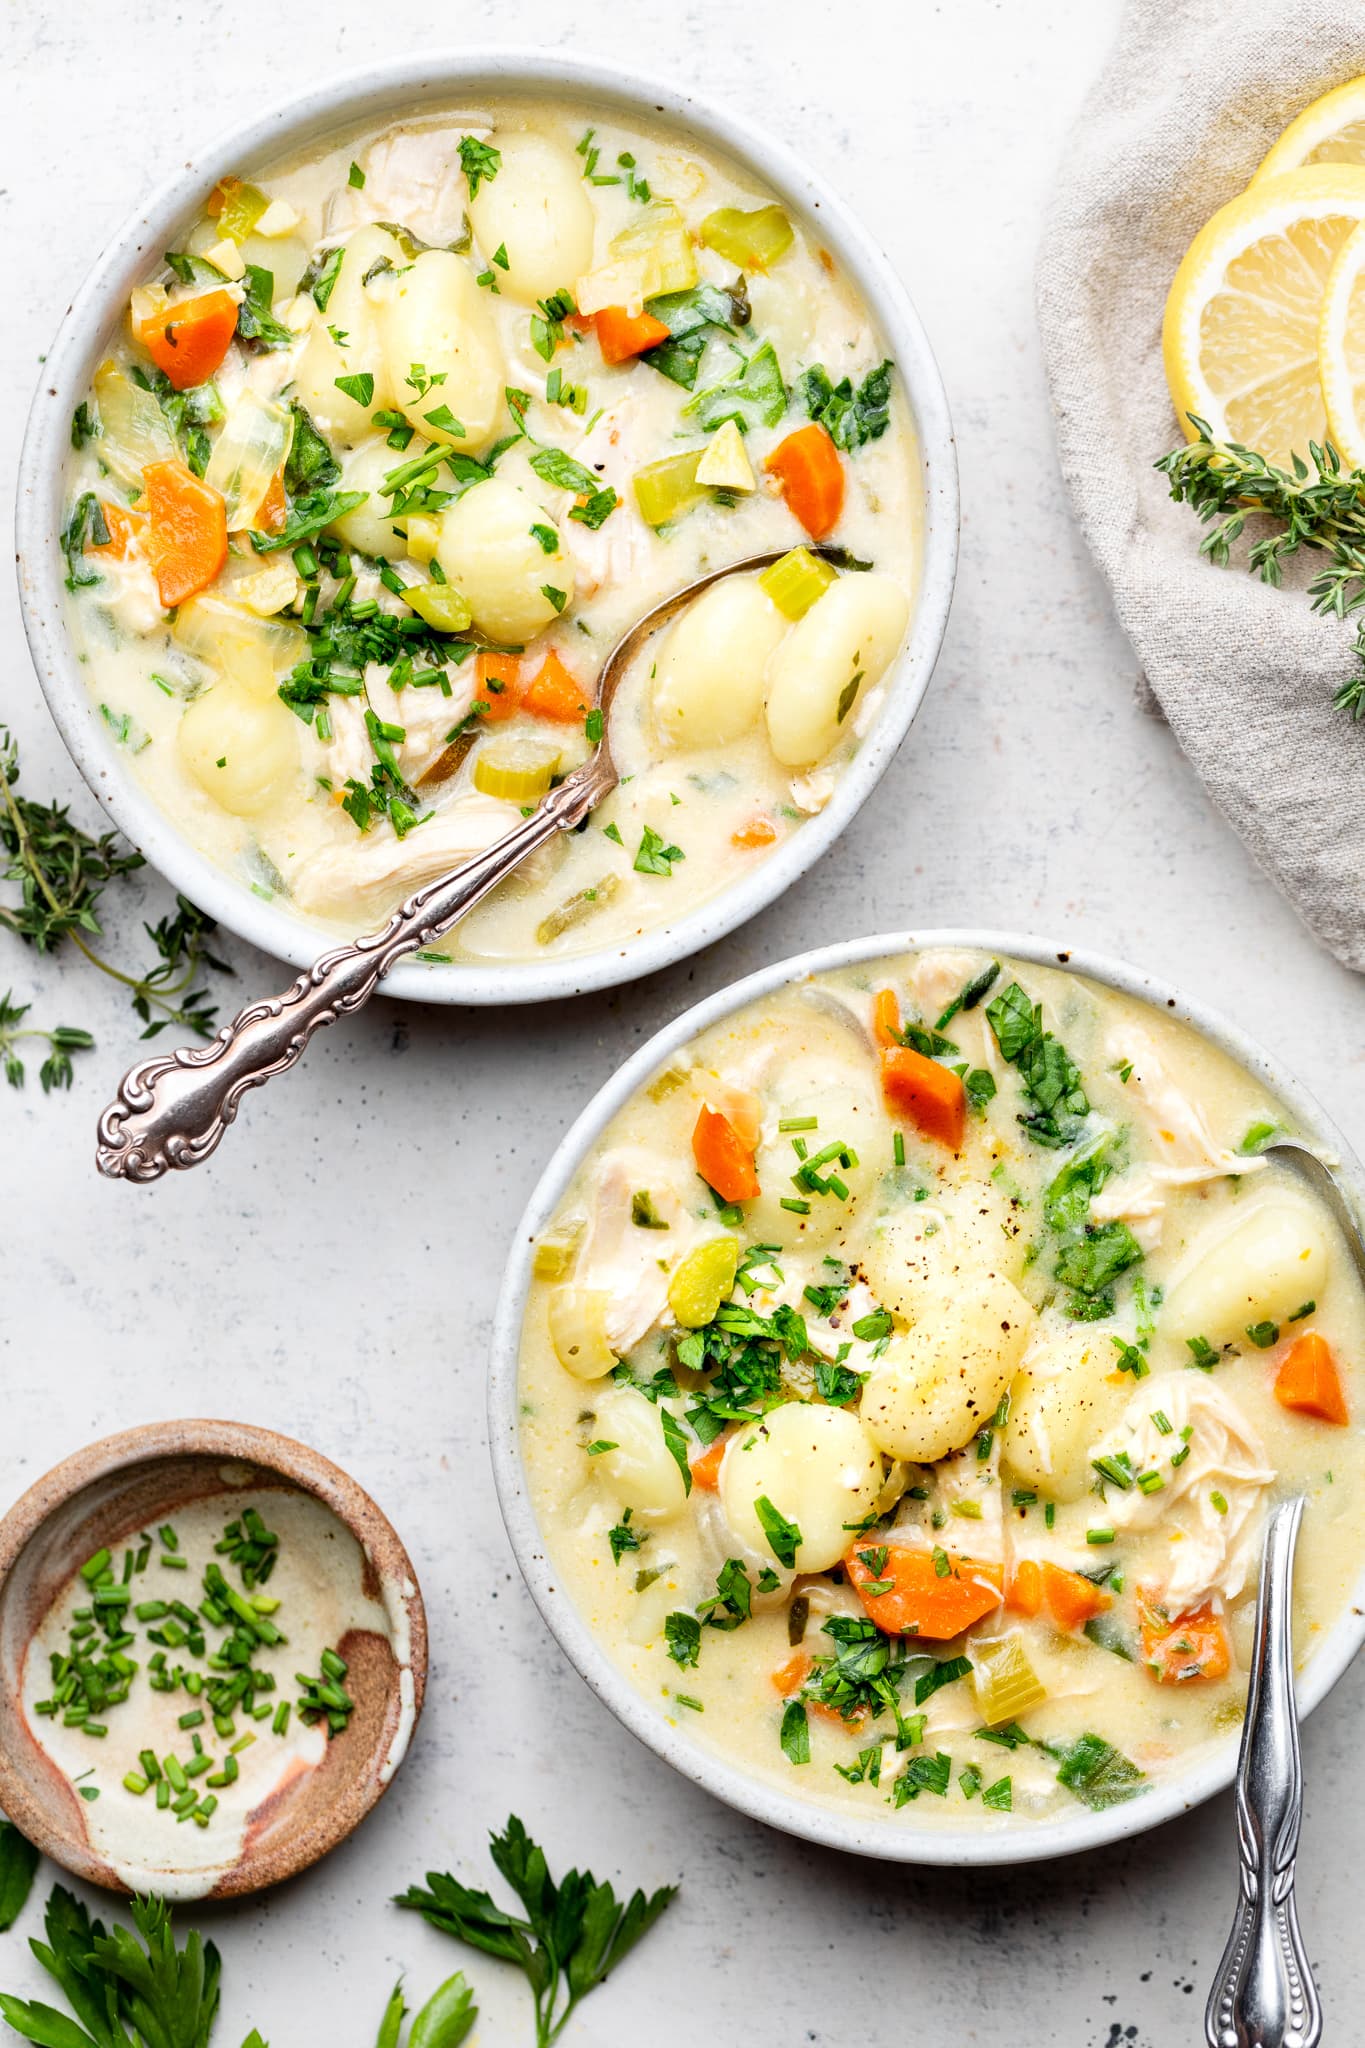 https://allthehealthythings.com/wp-content/uploads/2021/09/chicken-gnocchi-soup-7.jpg